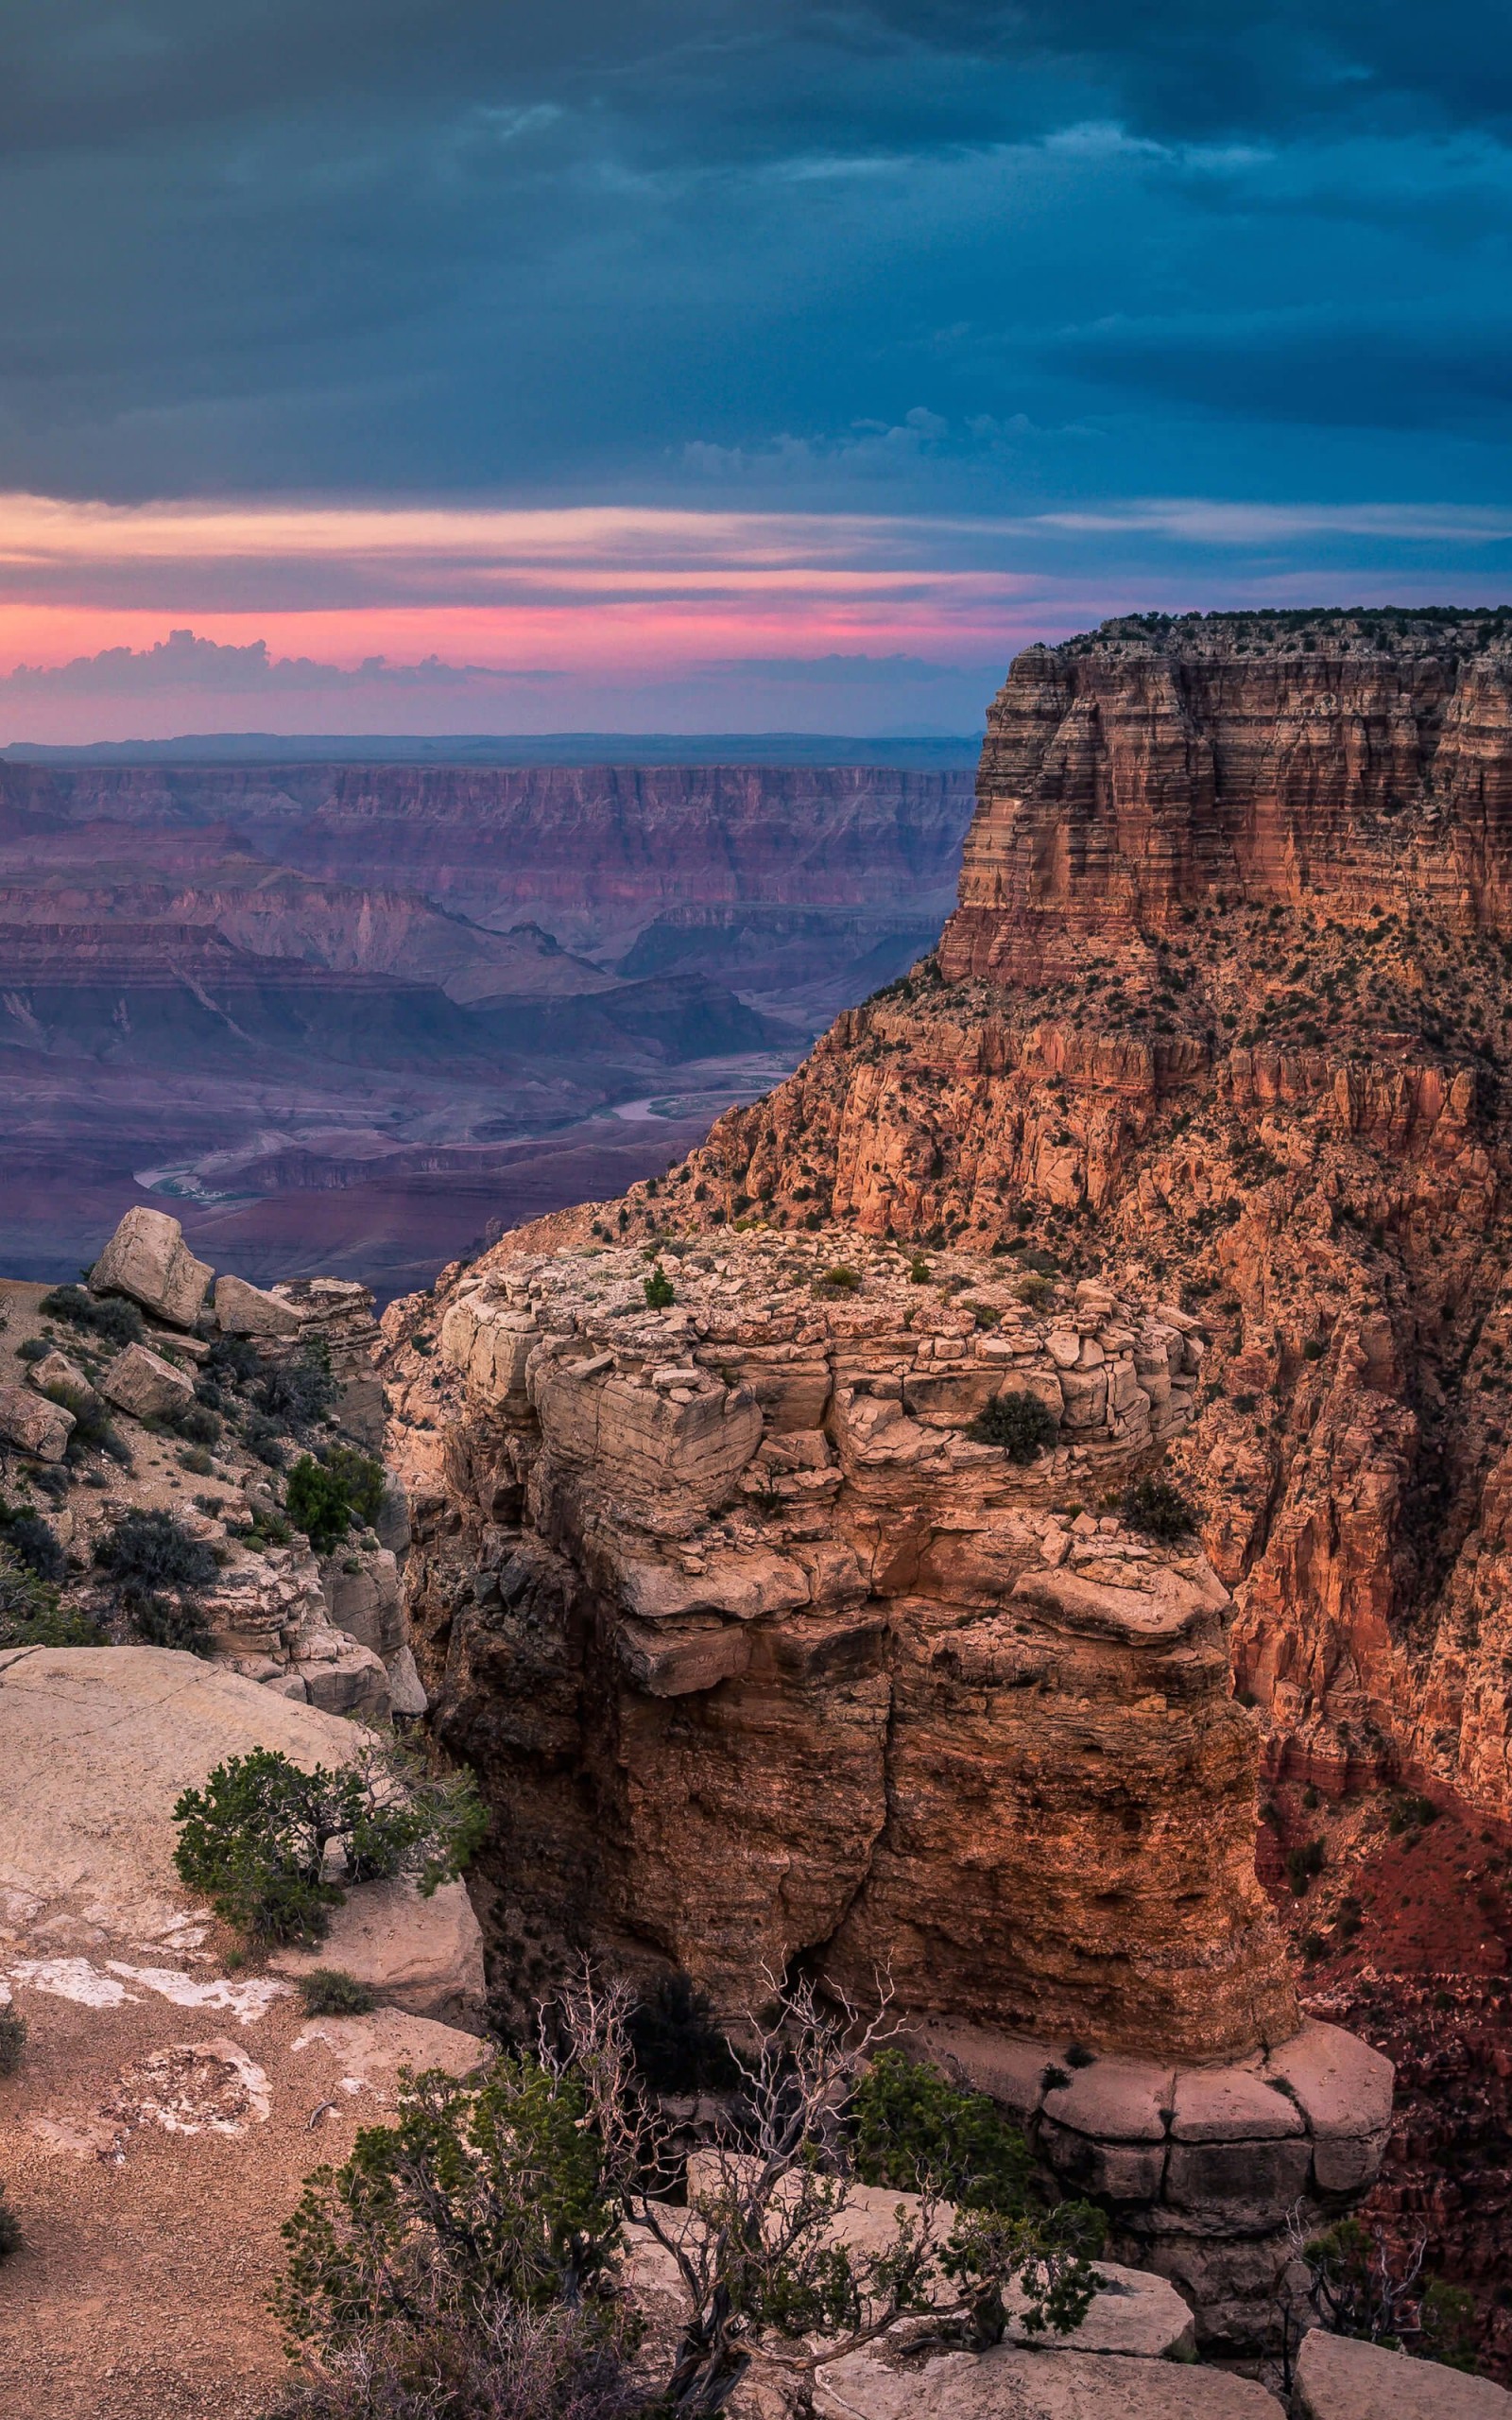 Sunset At The Grand Canyon Wallpaper for Amazon Kindle Fire HDX 8.9